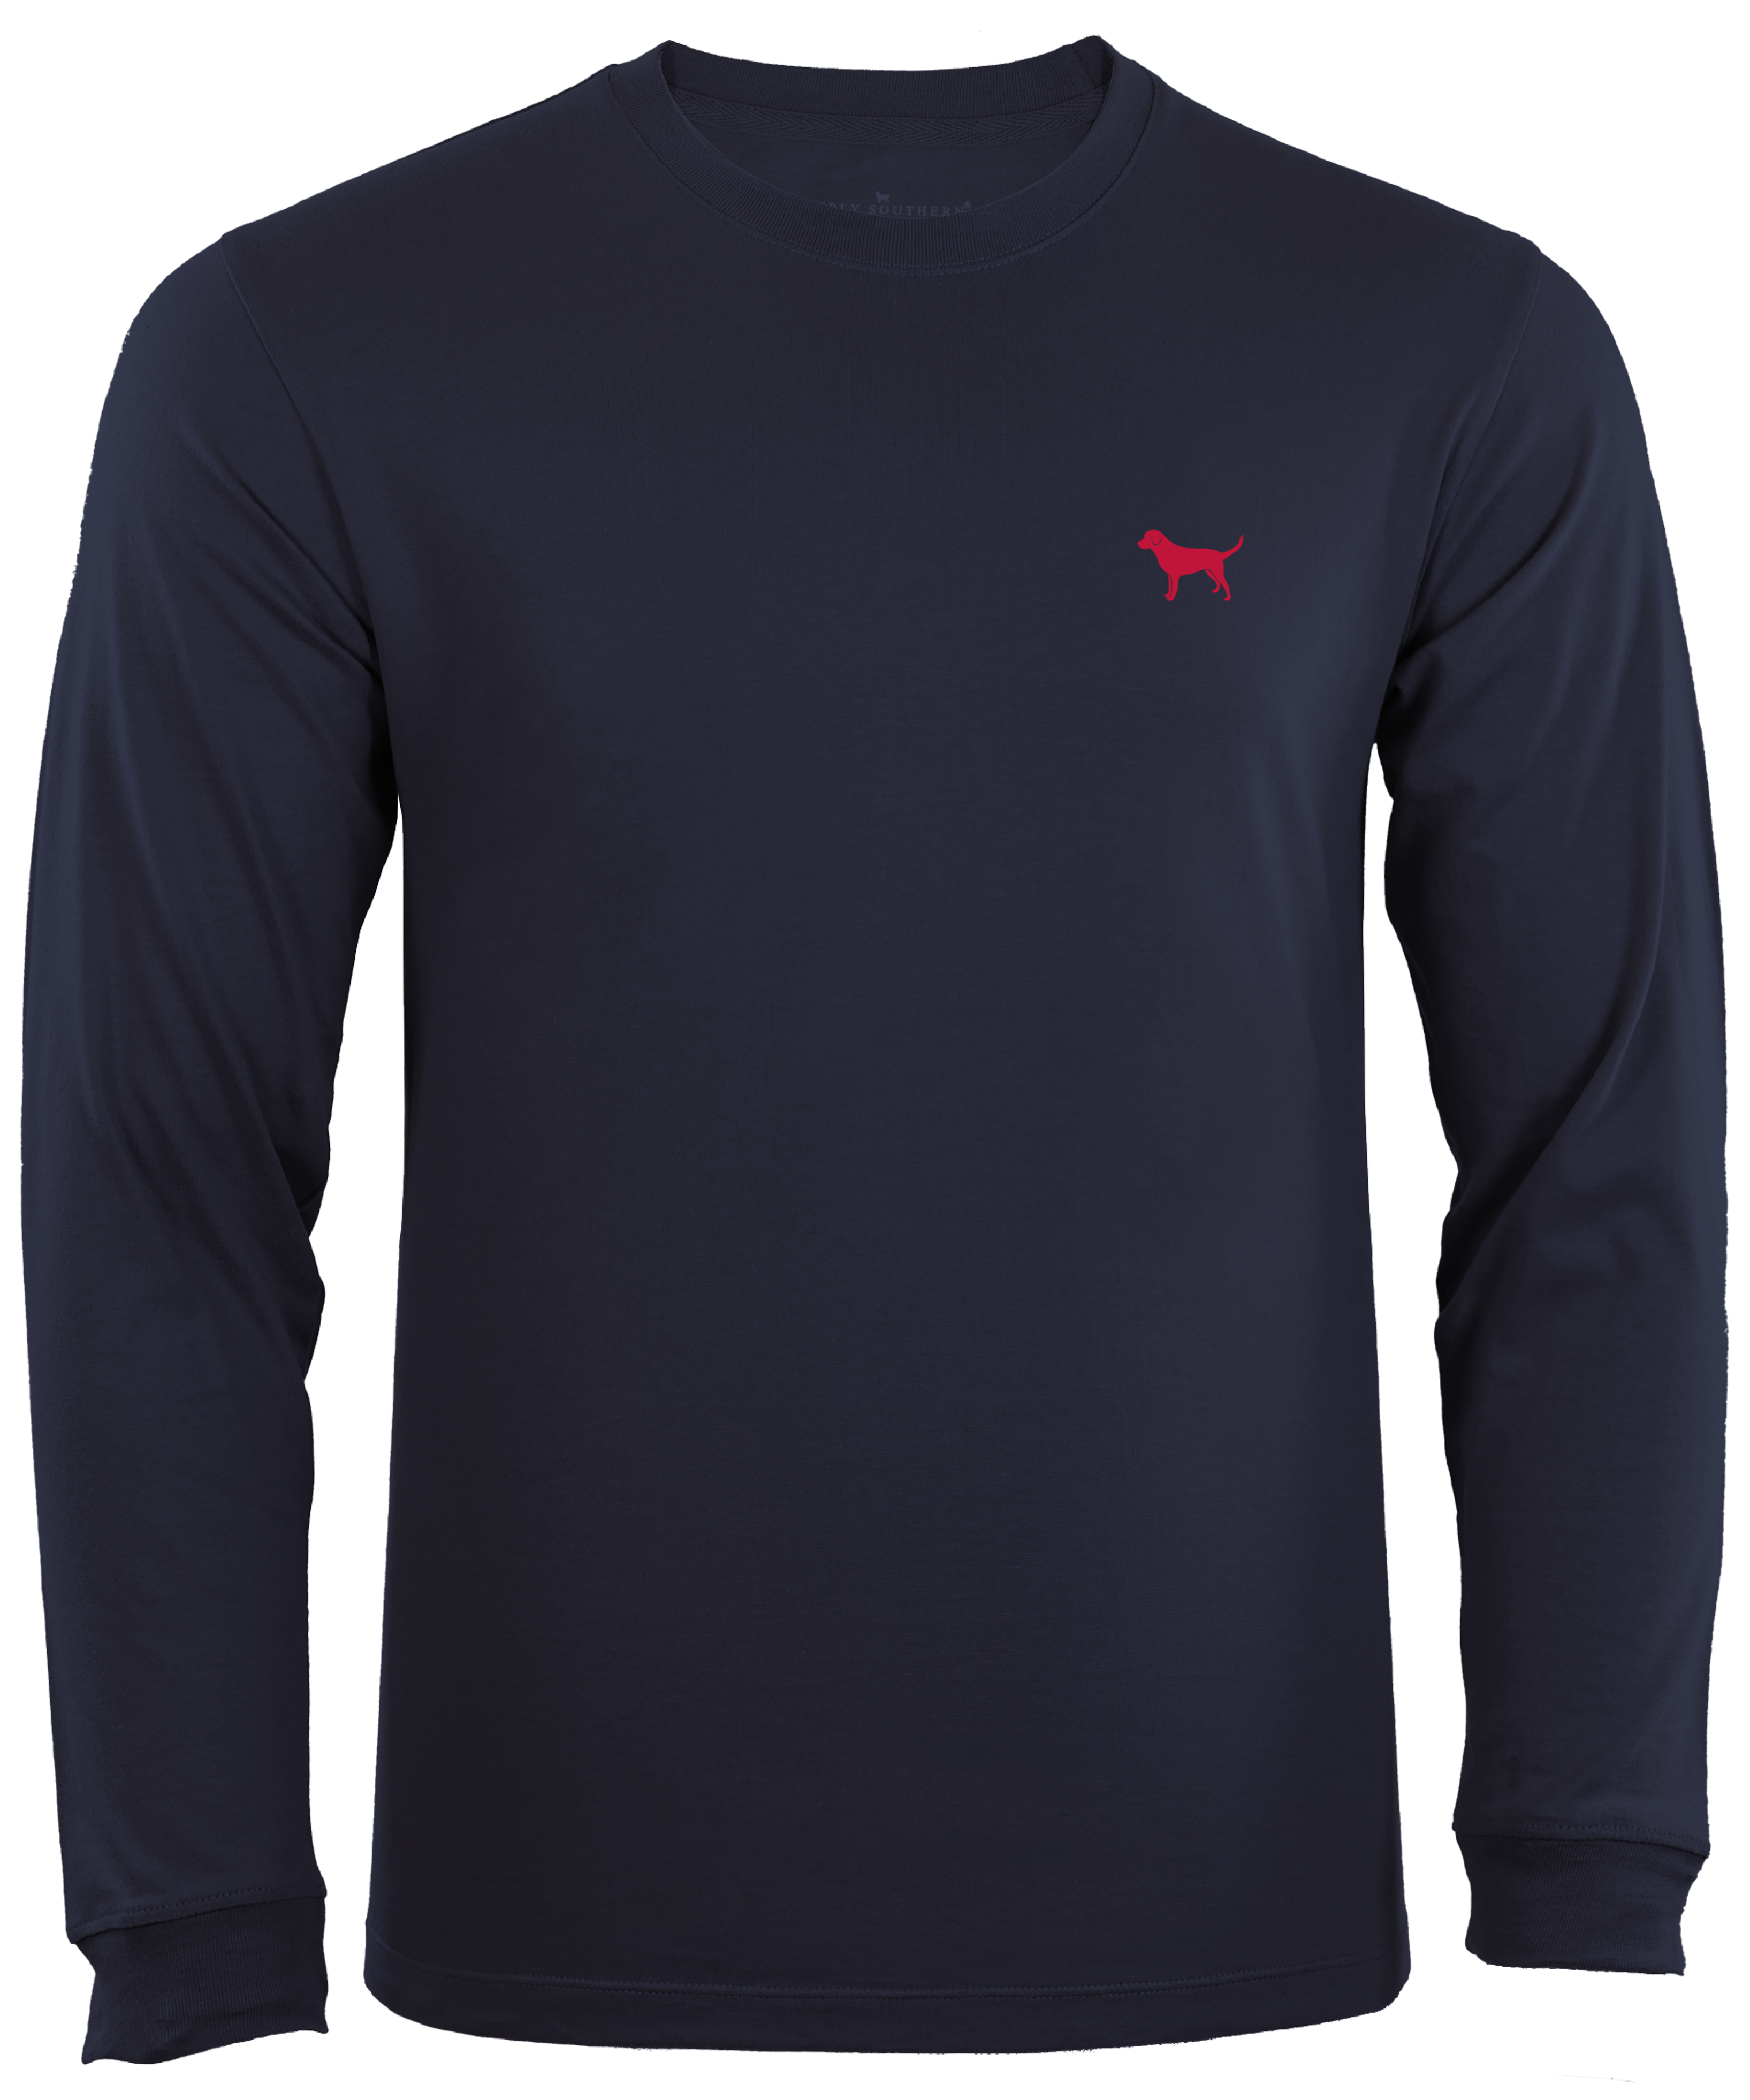 'United We Stand' Long Sleeve Shirt by Simply Southern